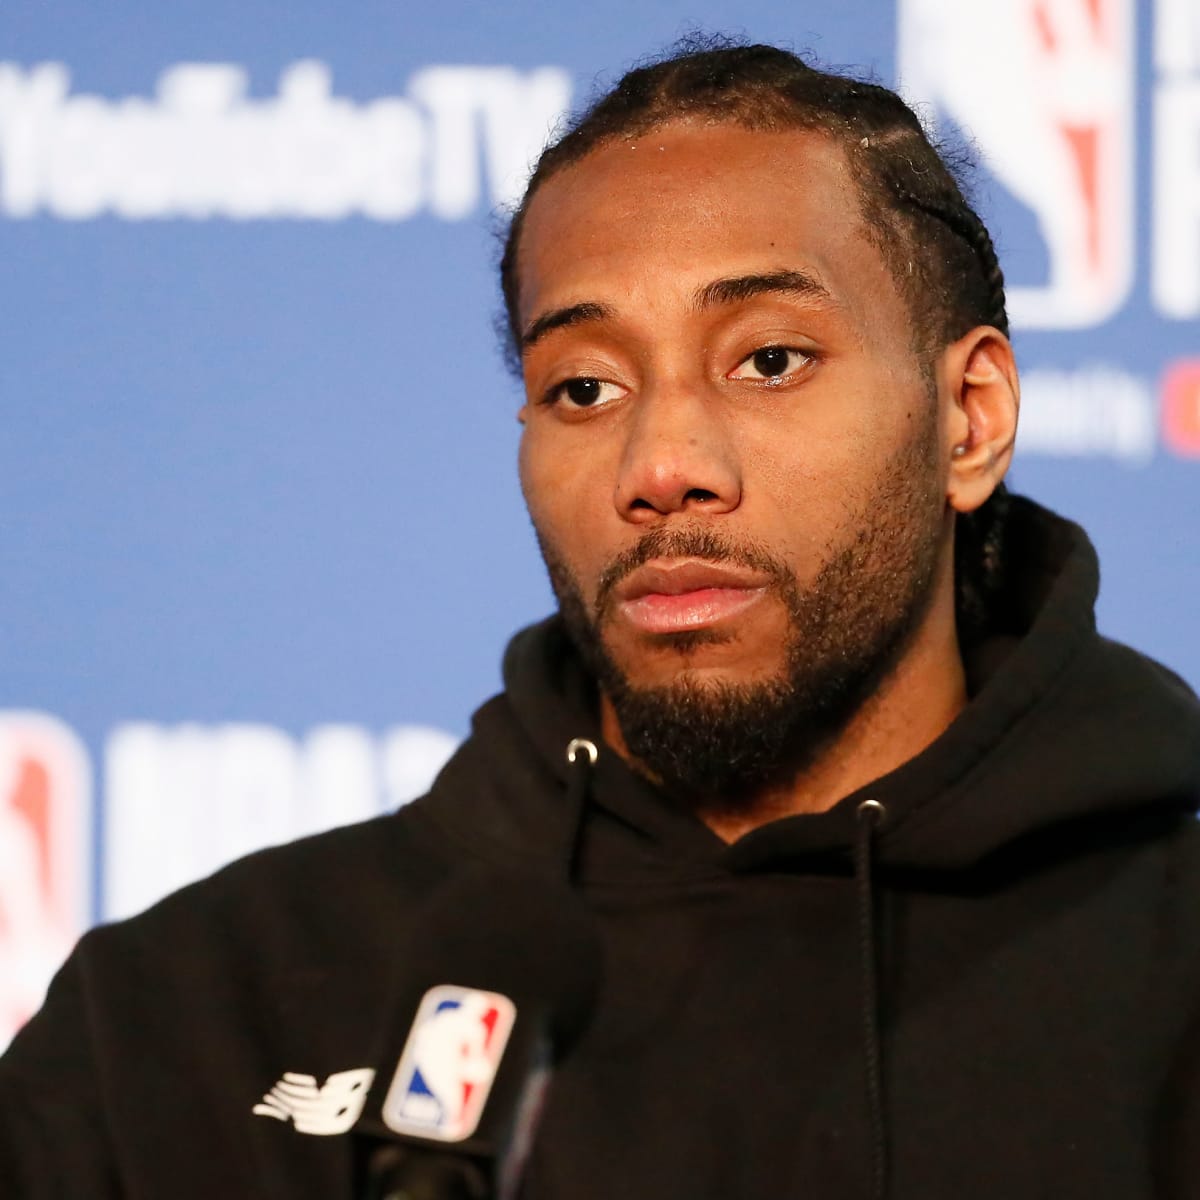 Nike and Kawhi Leonard in an ongoing battle over The Klaw logo Sports Illustrated